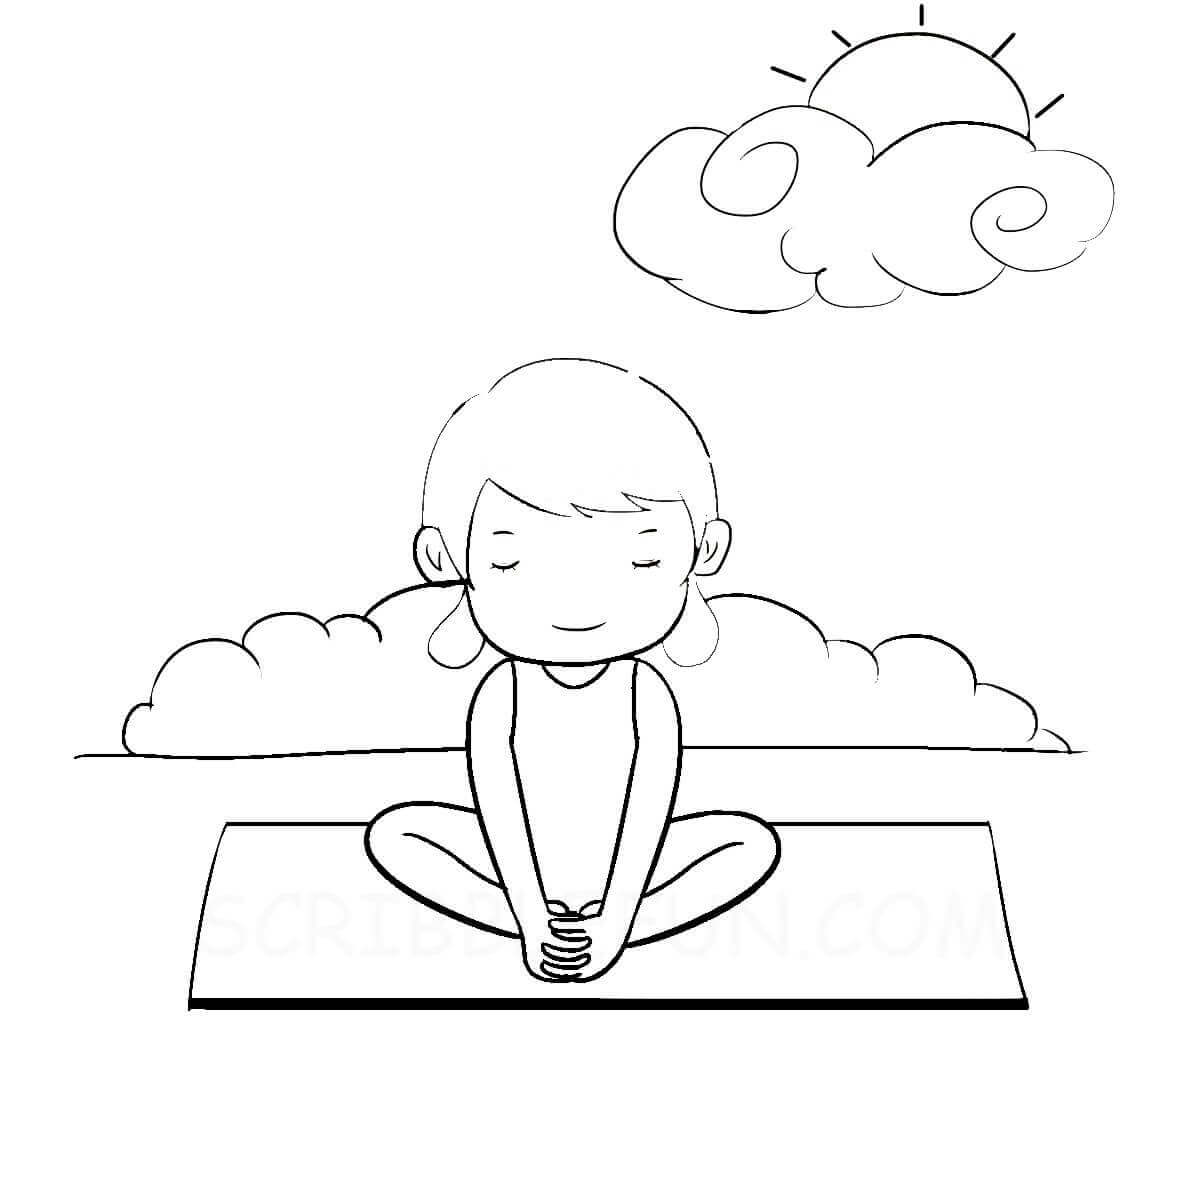 Outdoors coloring page